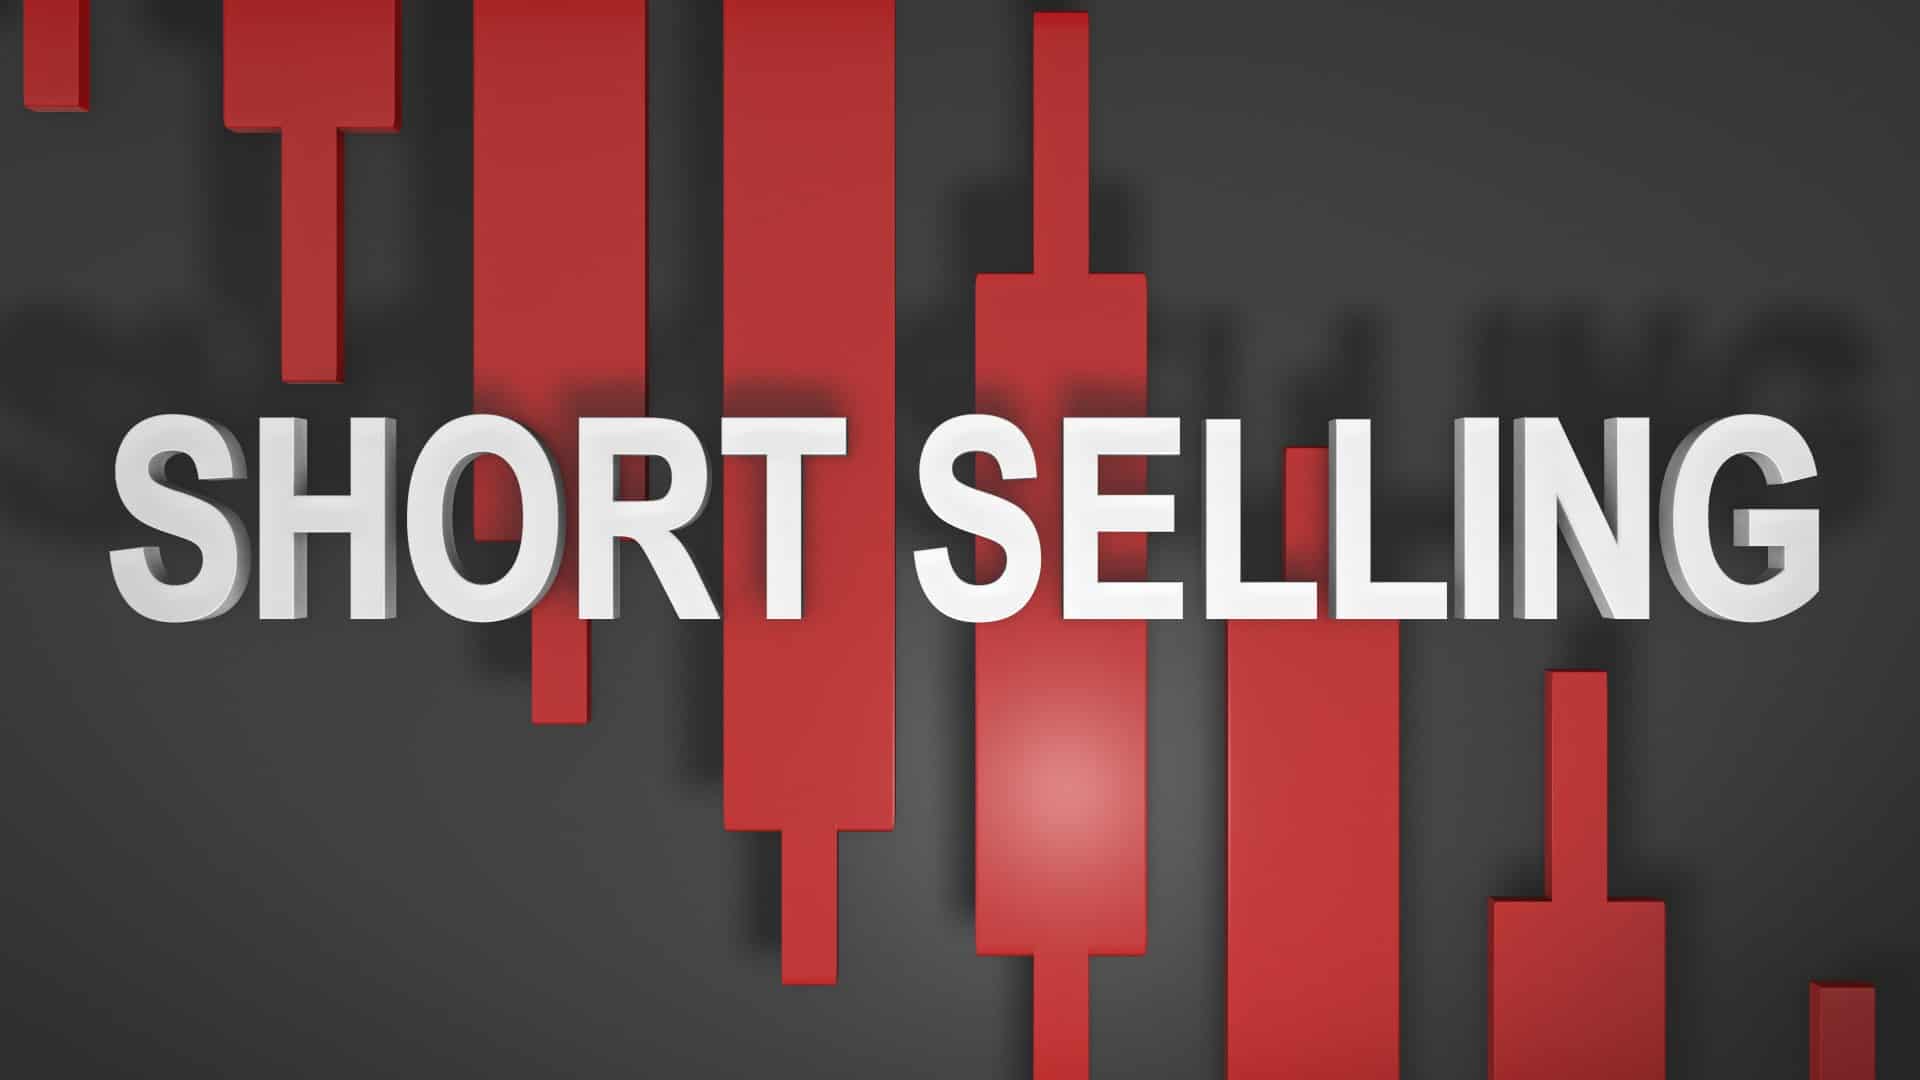 The words short selling in red against a black background